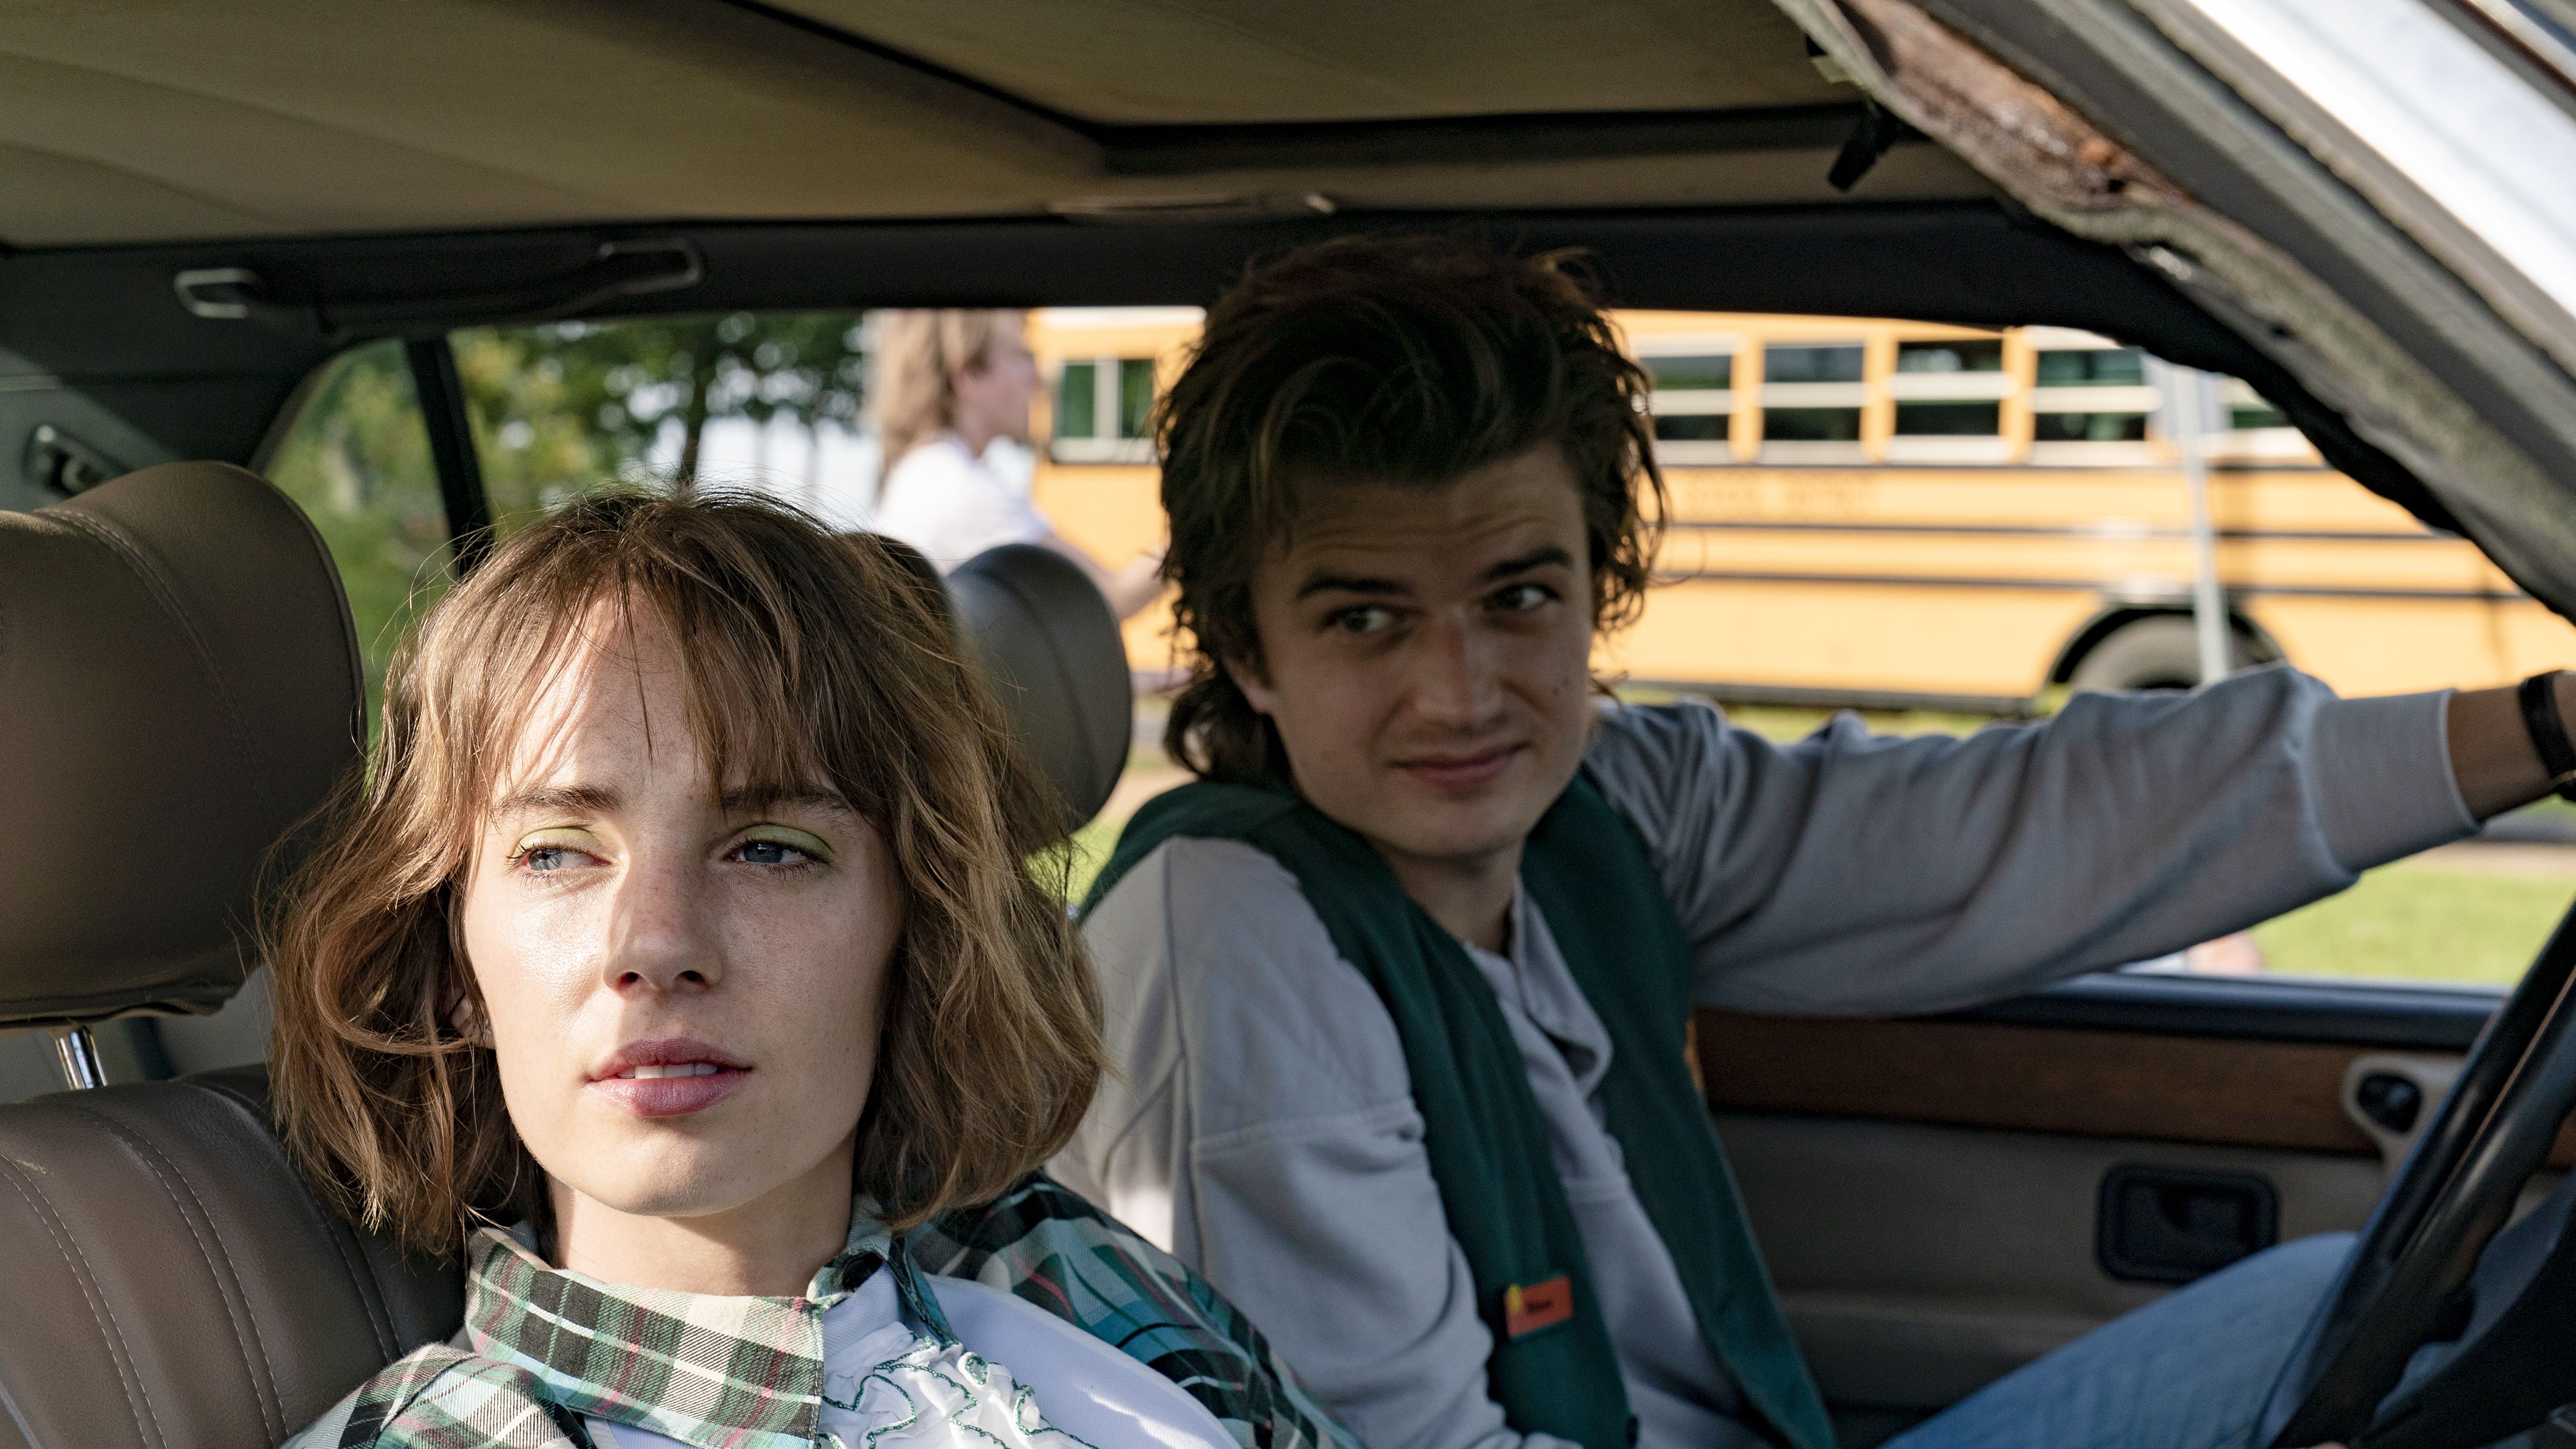 Stranger Things': Max must not die in season 5 of the show for